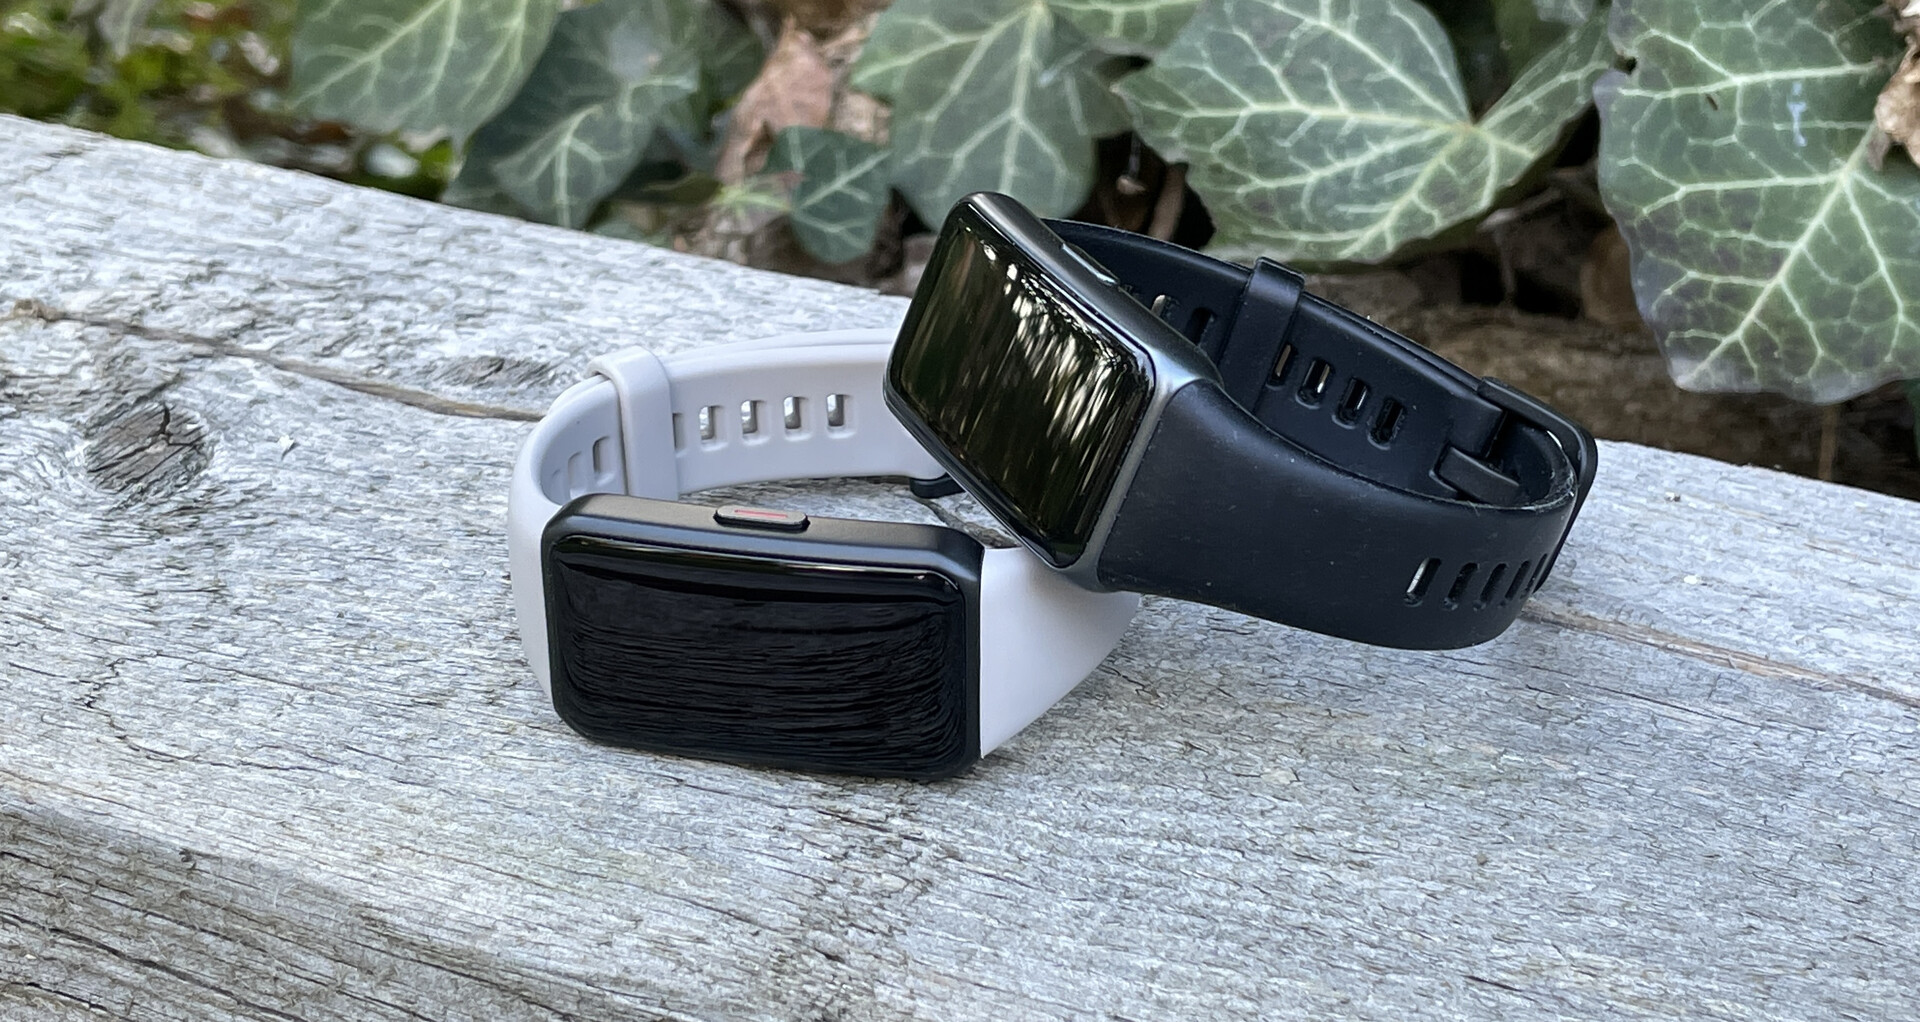 Eigendom verlamming Nieuwe aankomst Huawei Band 6 and Honor Band 6 in review: Honor loses out once again in the  last joint fitness tracker - NotebookCheck.net Reviews